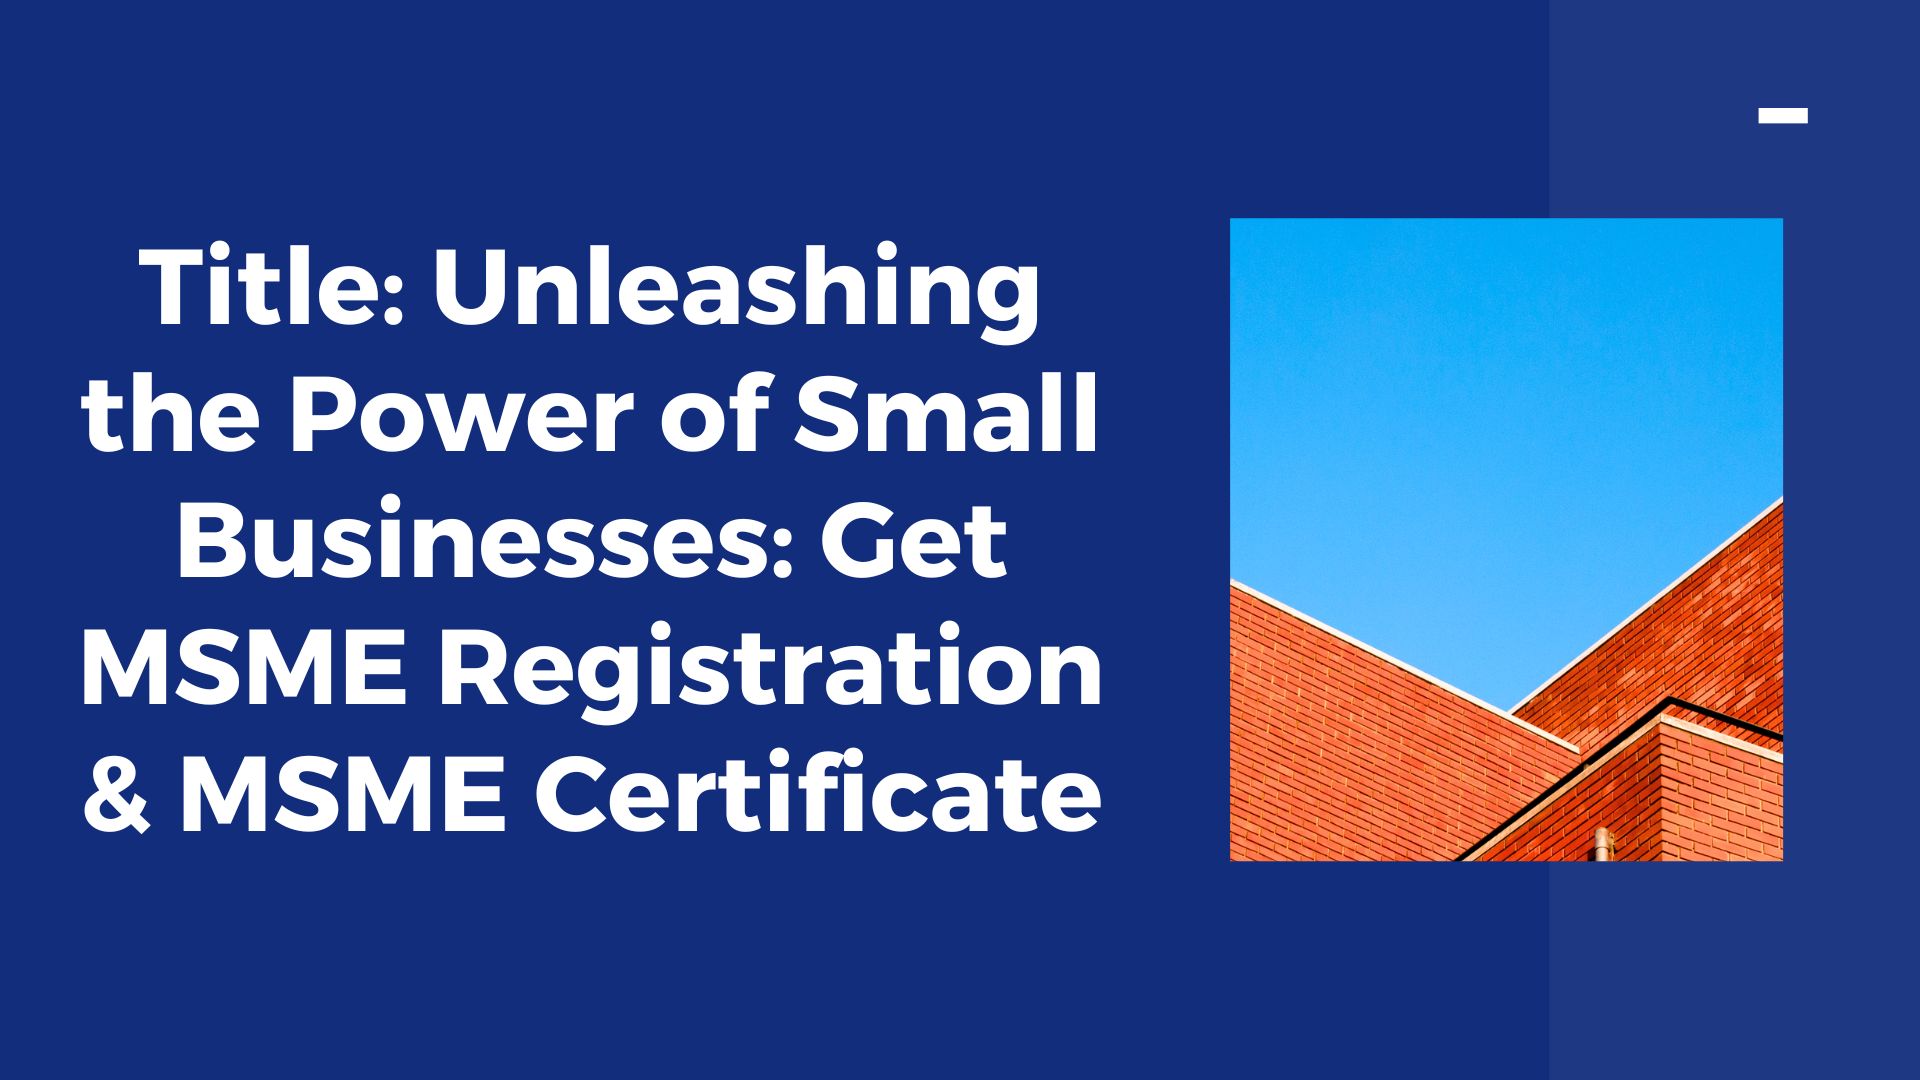 Title: Unleashing the Power of Small Businesses: Get MSME Registration & MSME Certificate